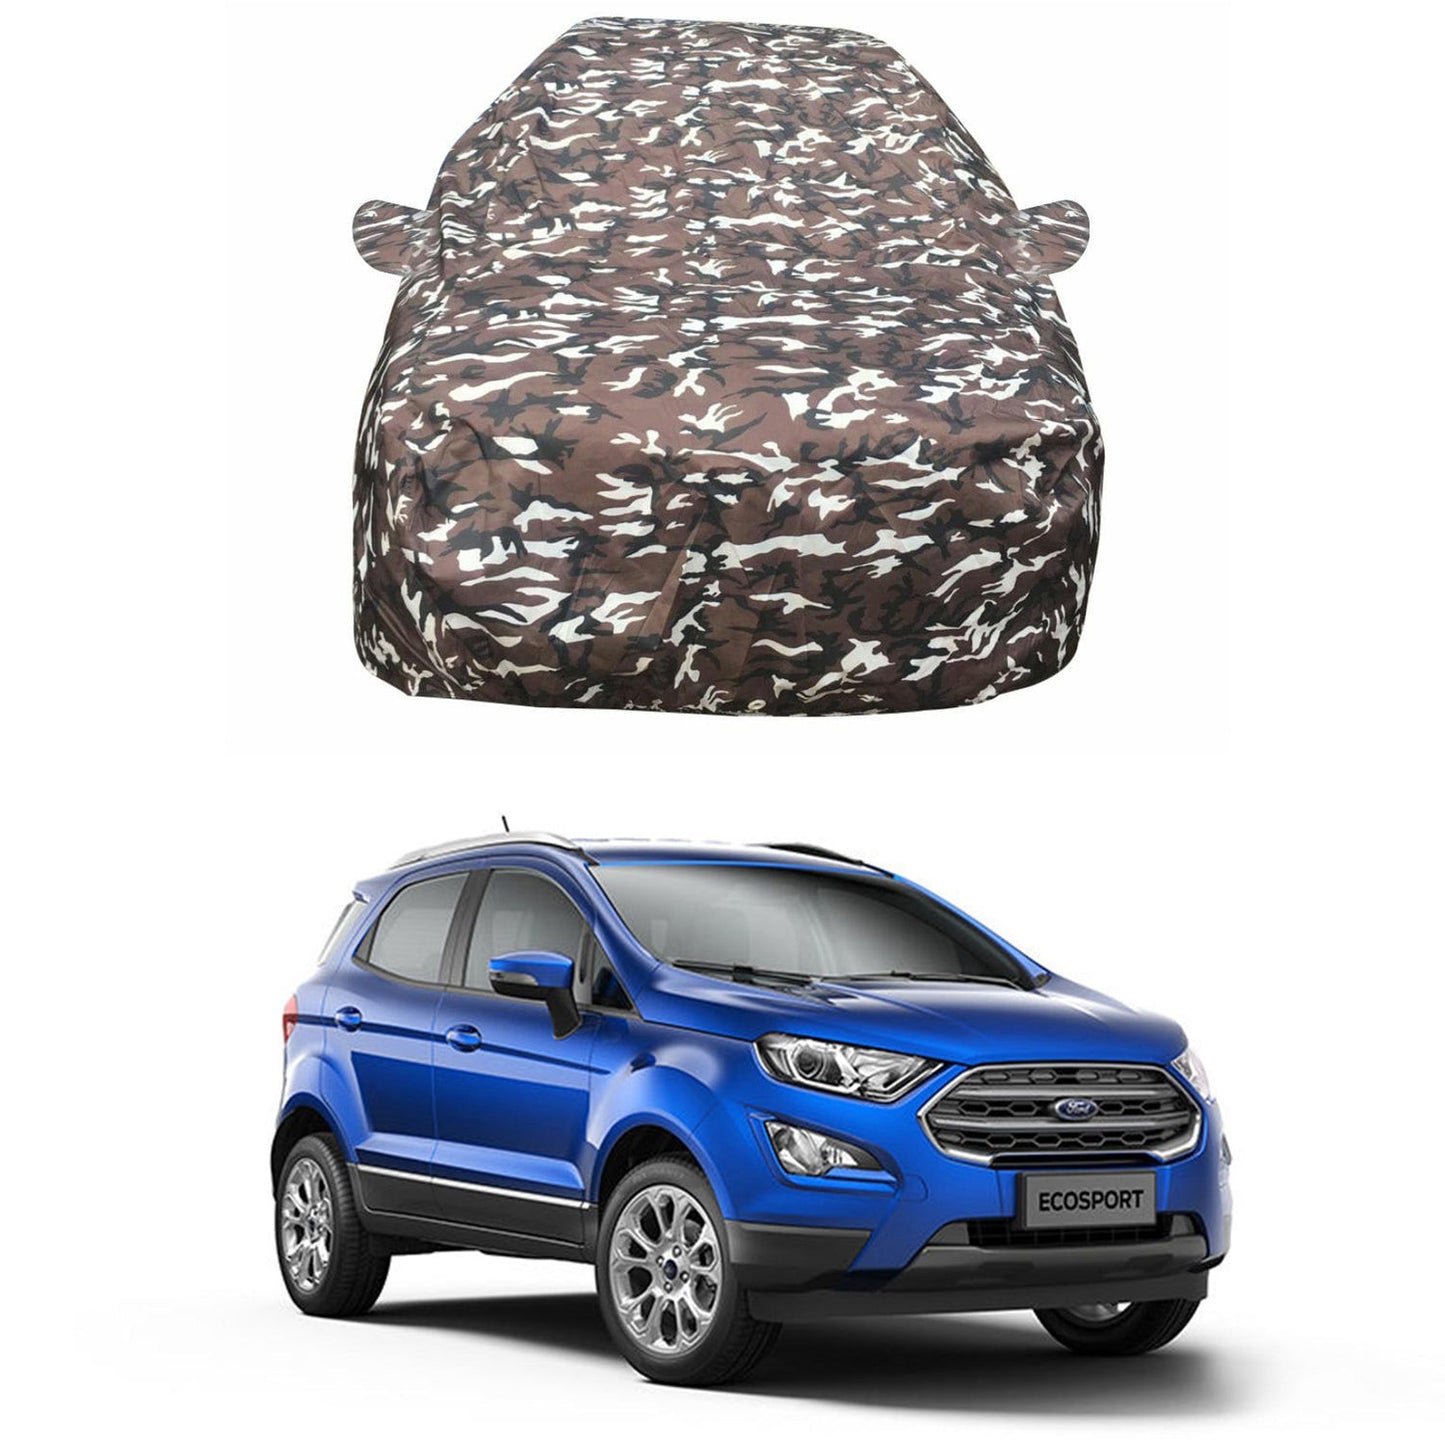 Oshotto Ranger Design Made of 100% Waterproof Fabric Multicolor Car Body Cover with Mirror Pockets For Ford Ecosport